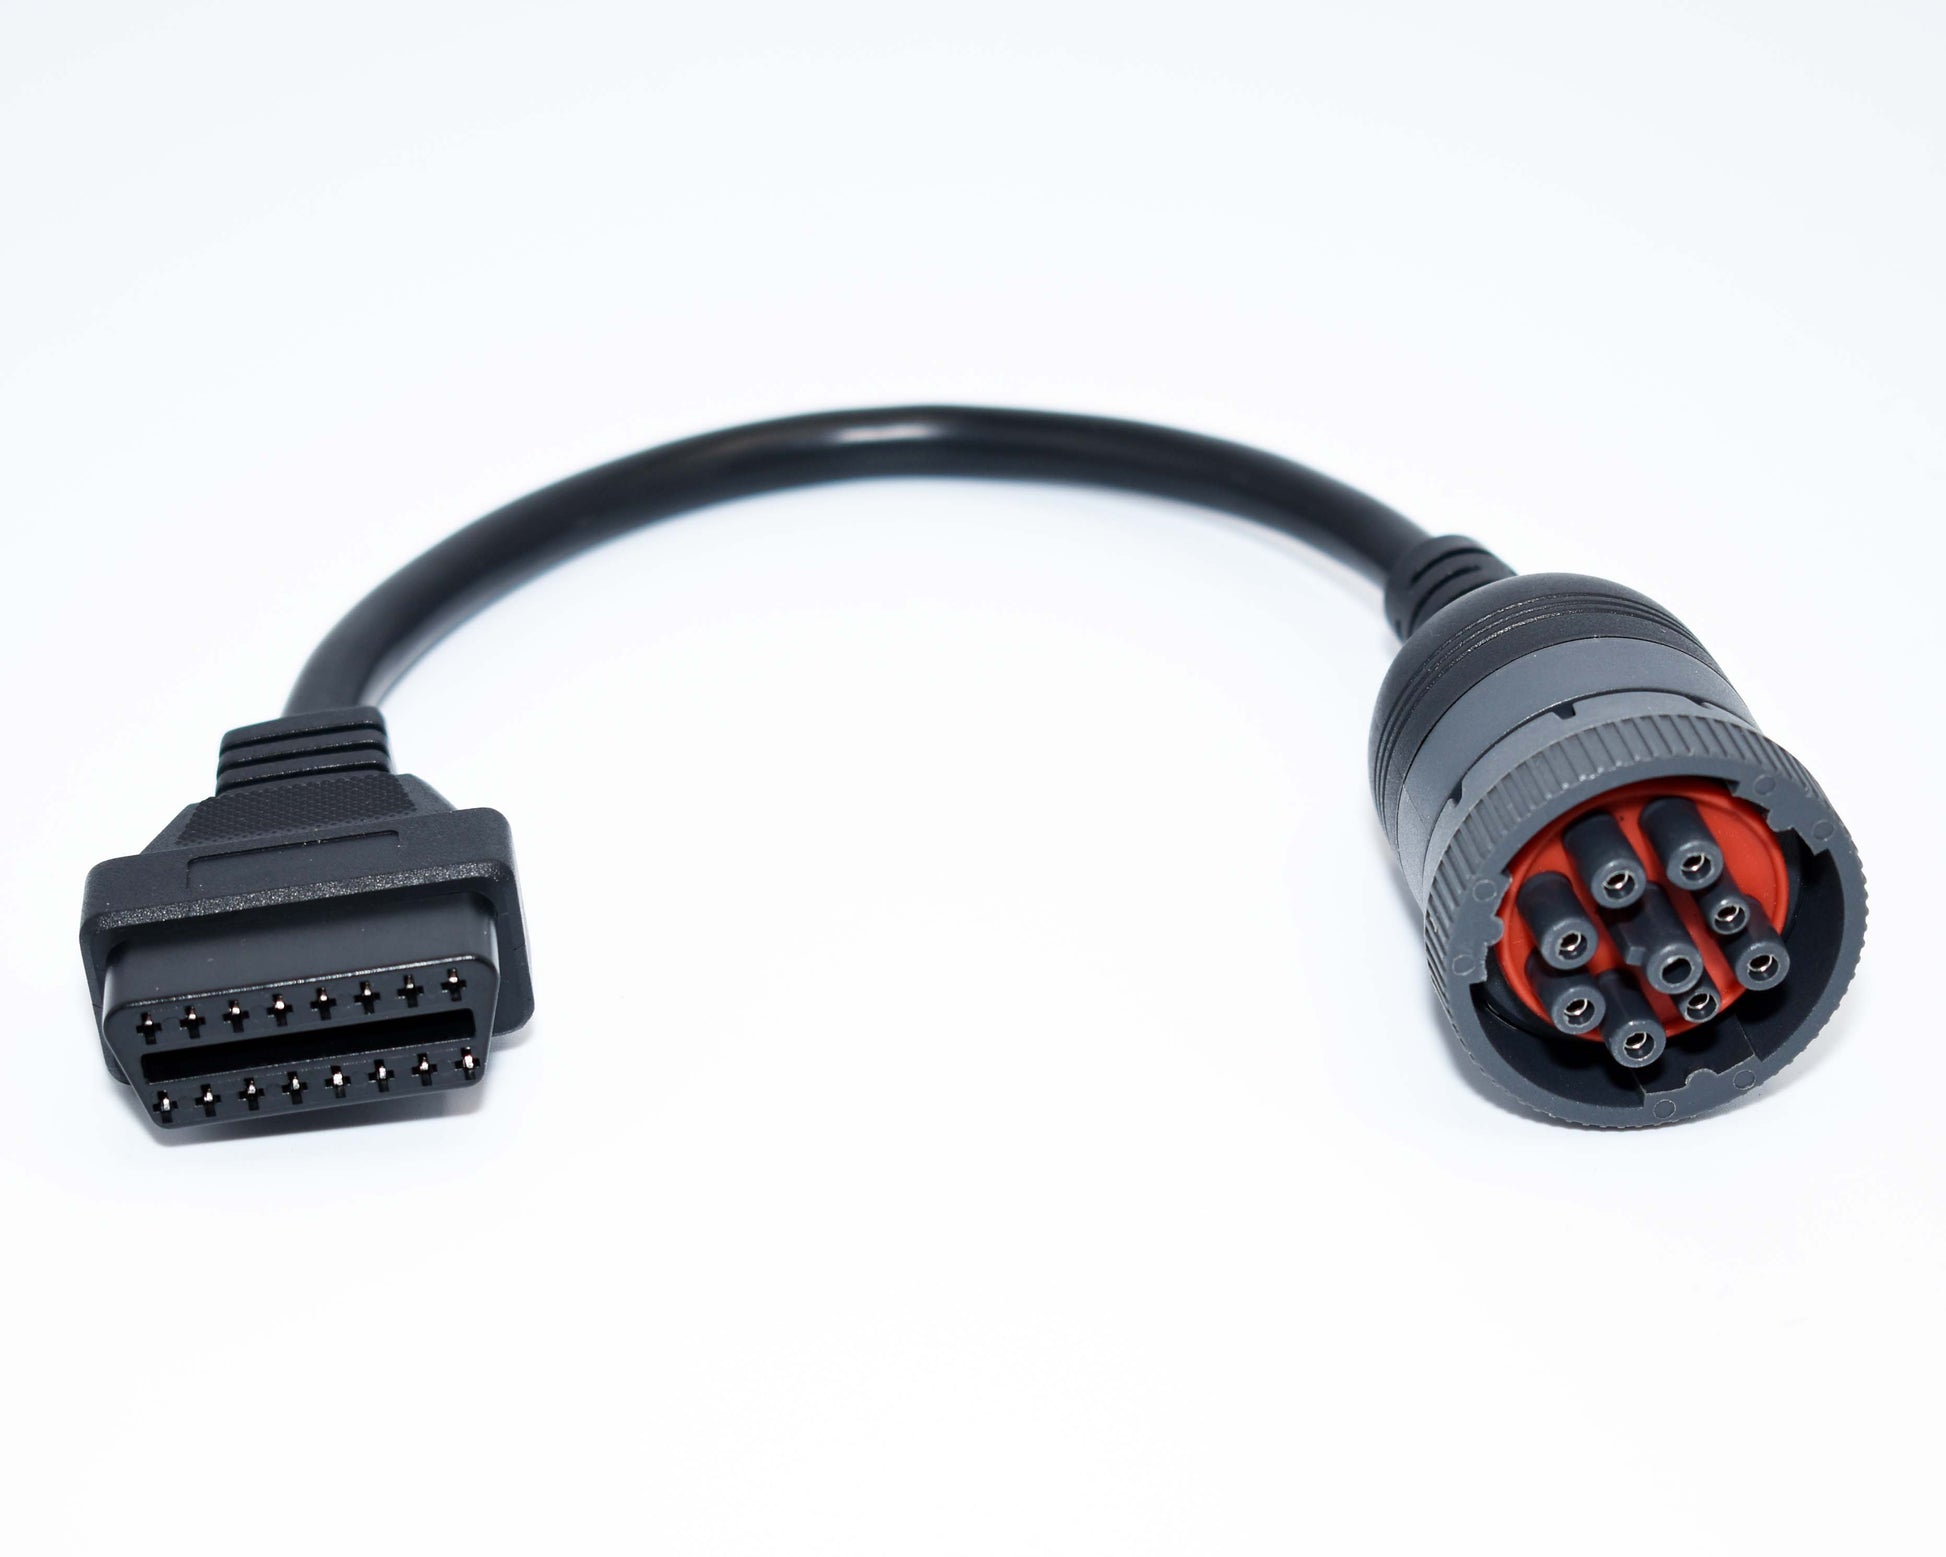 OBD2 Port Wiring: What protocol does your car use? – OBD2 Australia